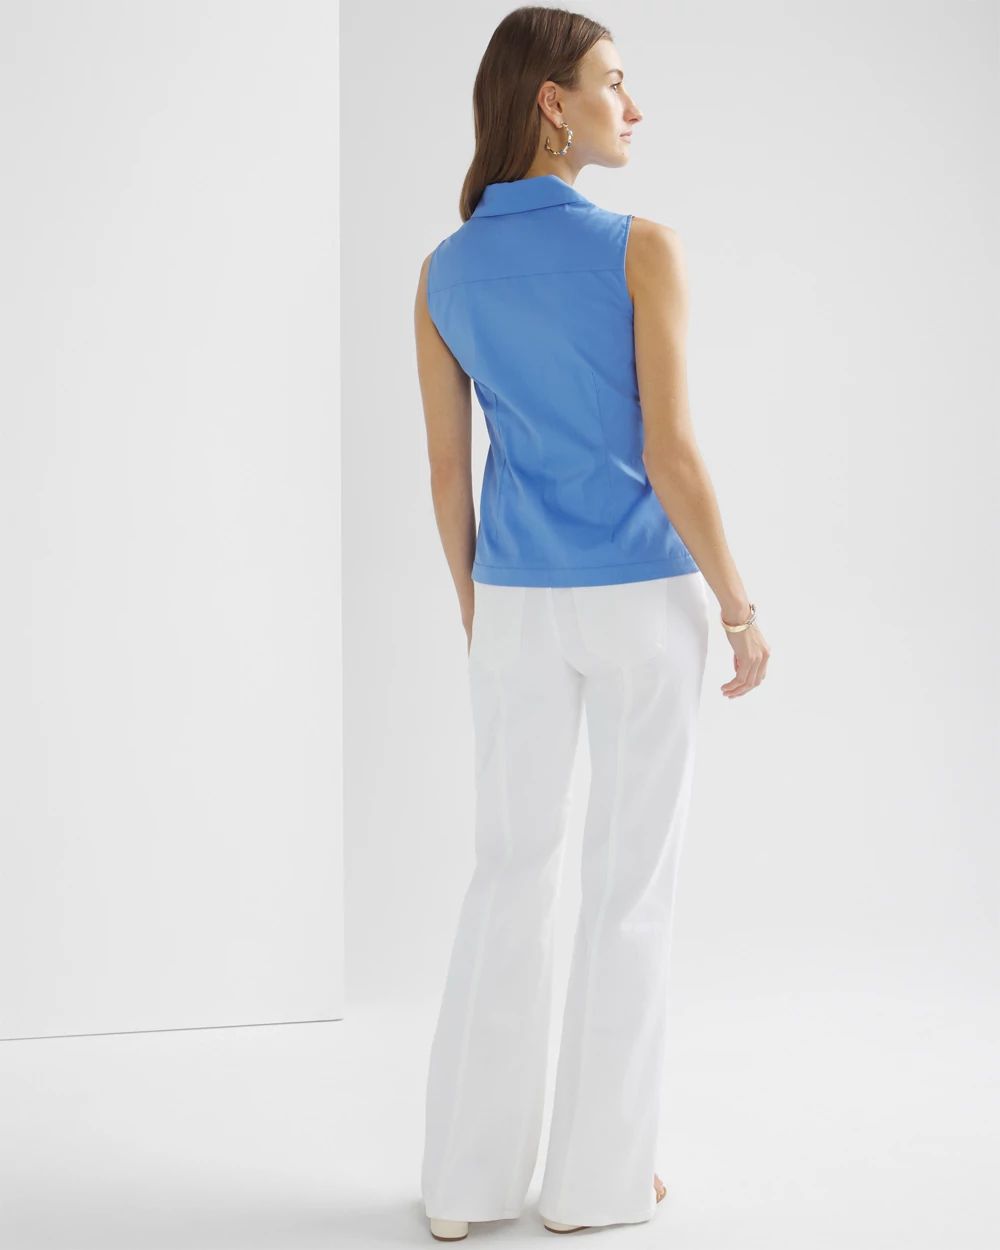 Petite Sleeveless Ruched Front Shirt click to view larger image.